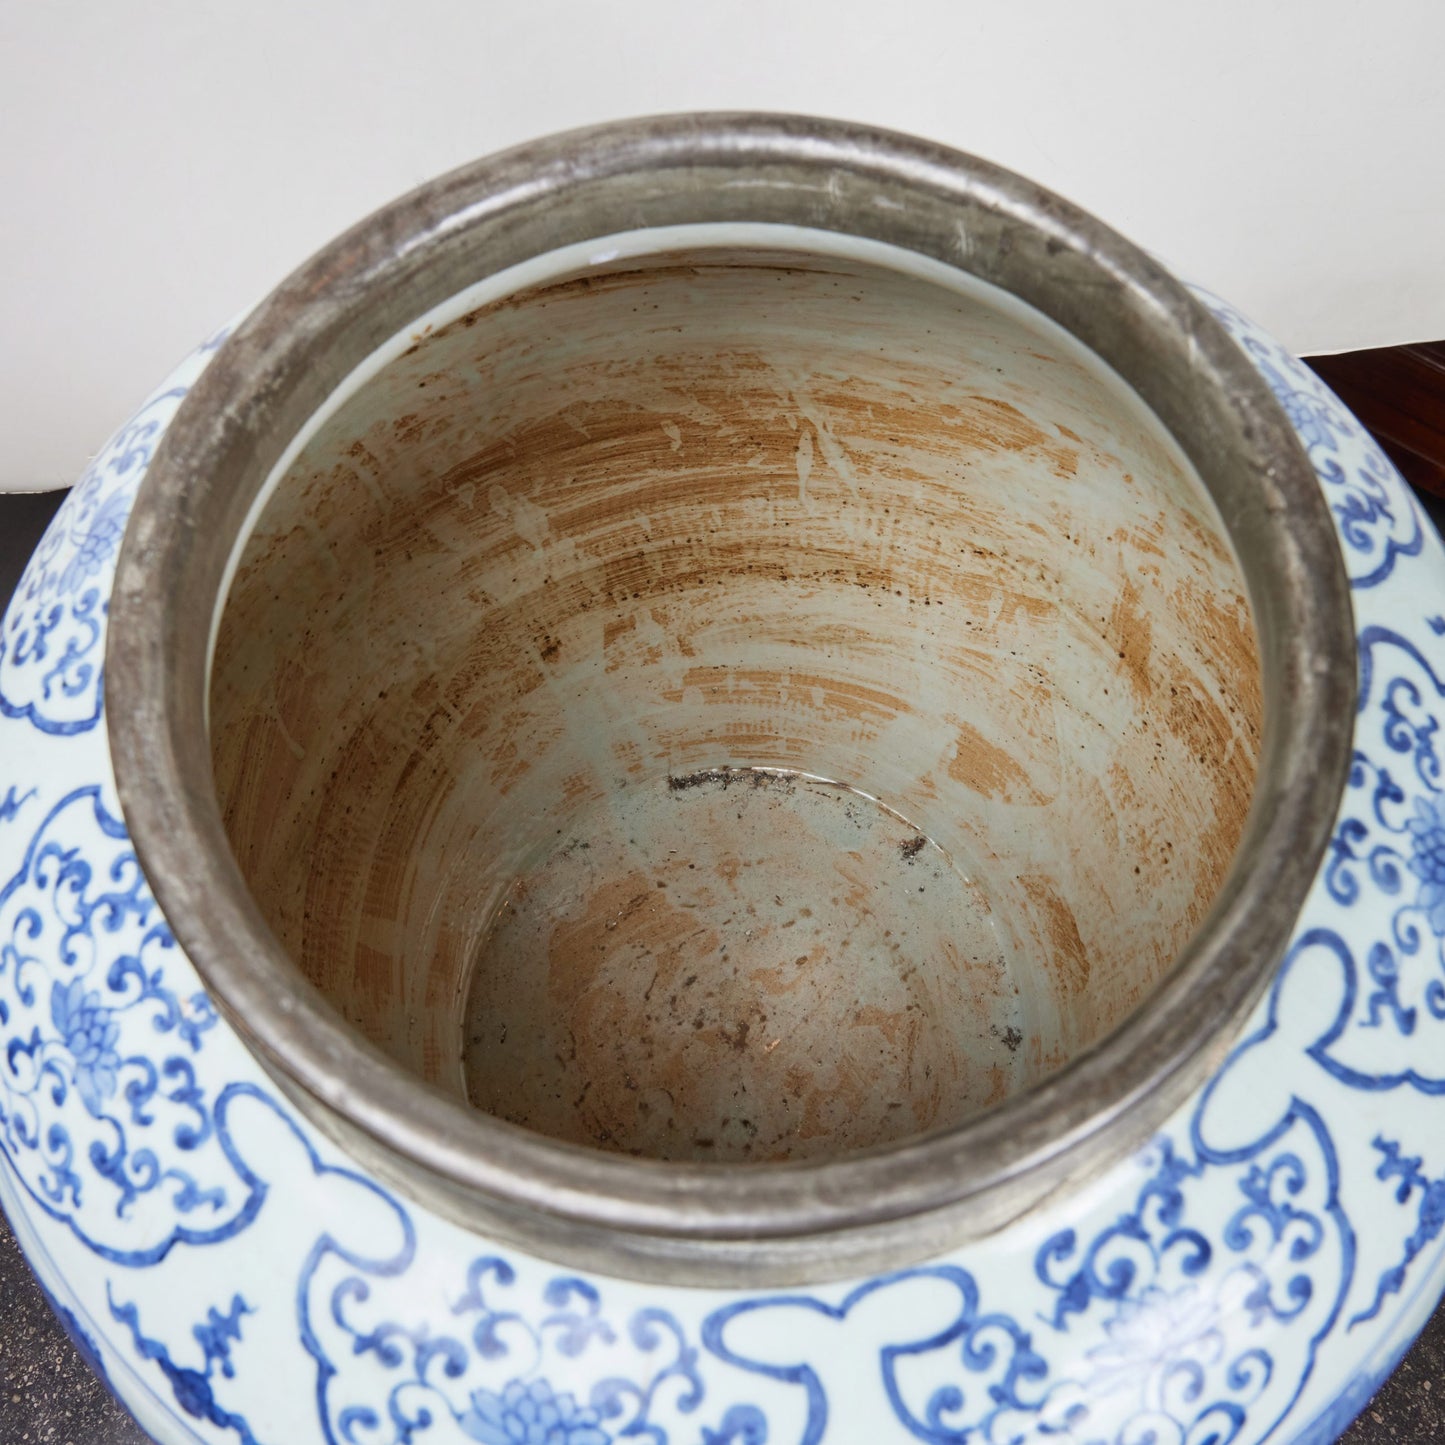 Large, Blue and White Chinese Urn